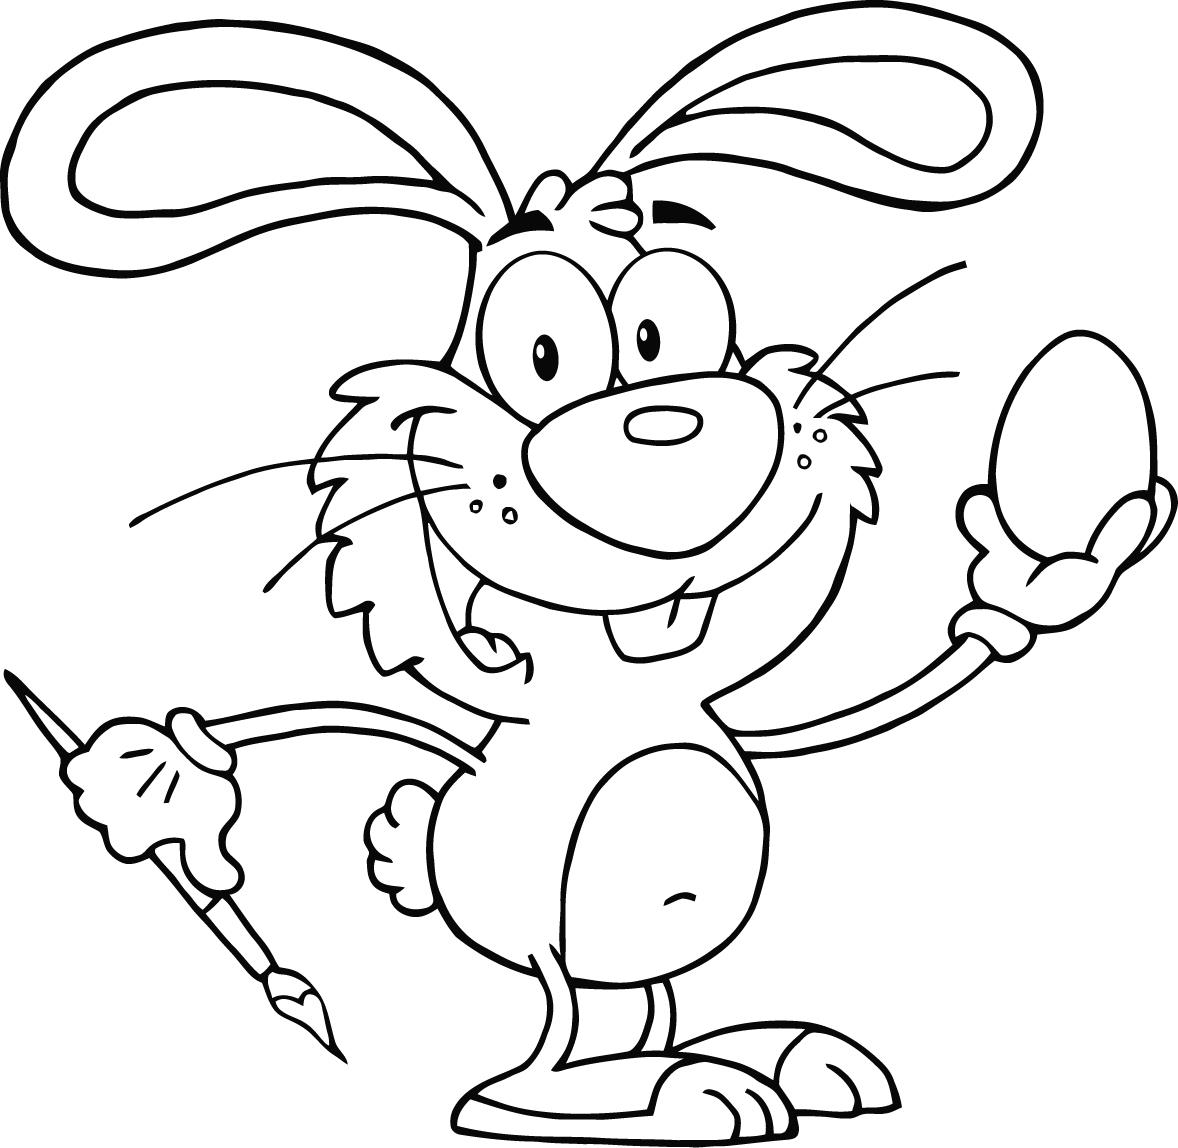 colouring pages rabbit bunny coloring pages best coloring pages for kids pages rabbit colouring 